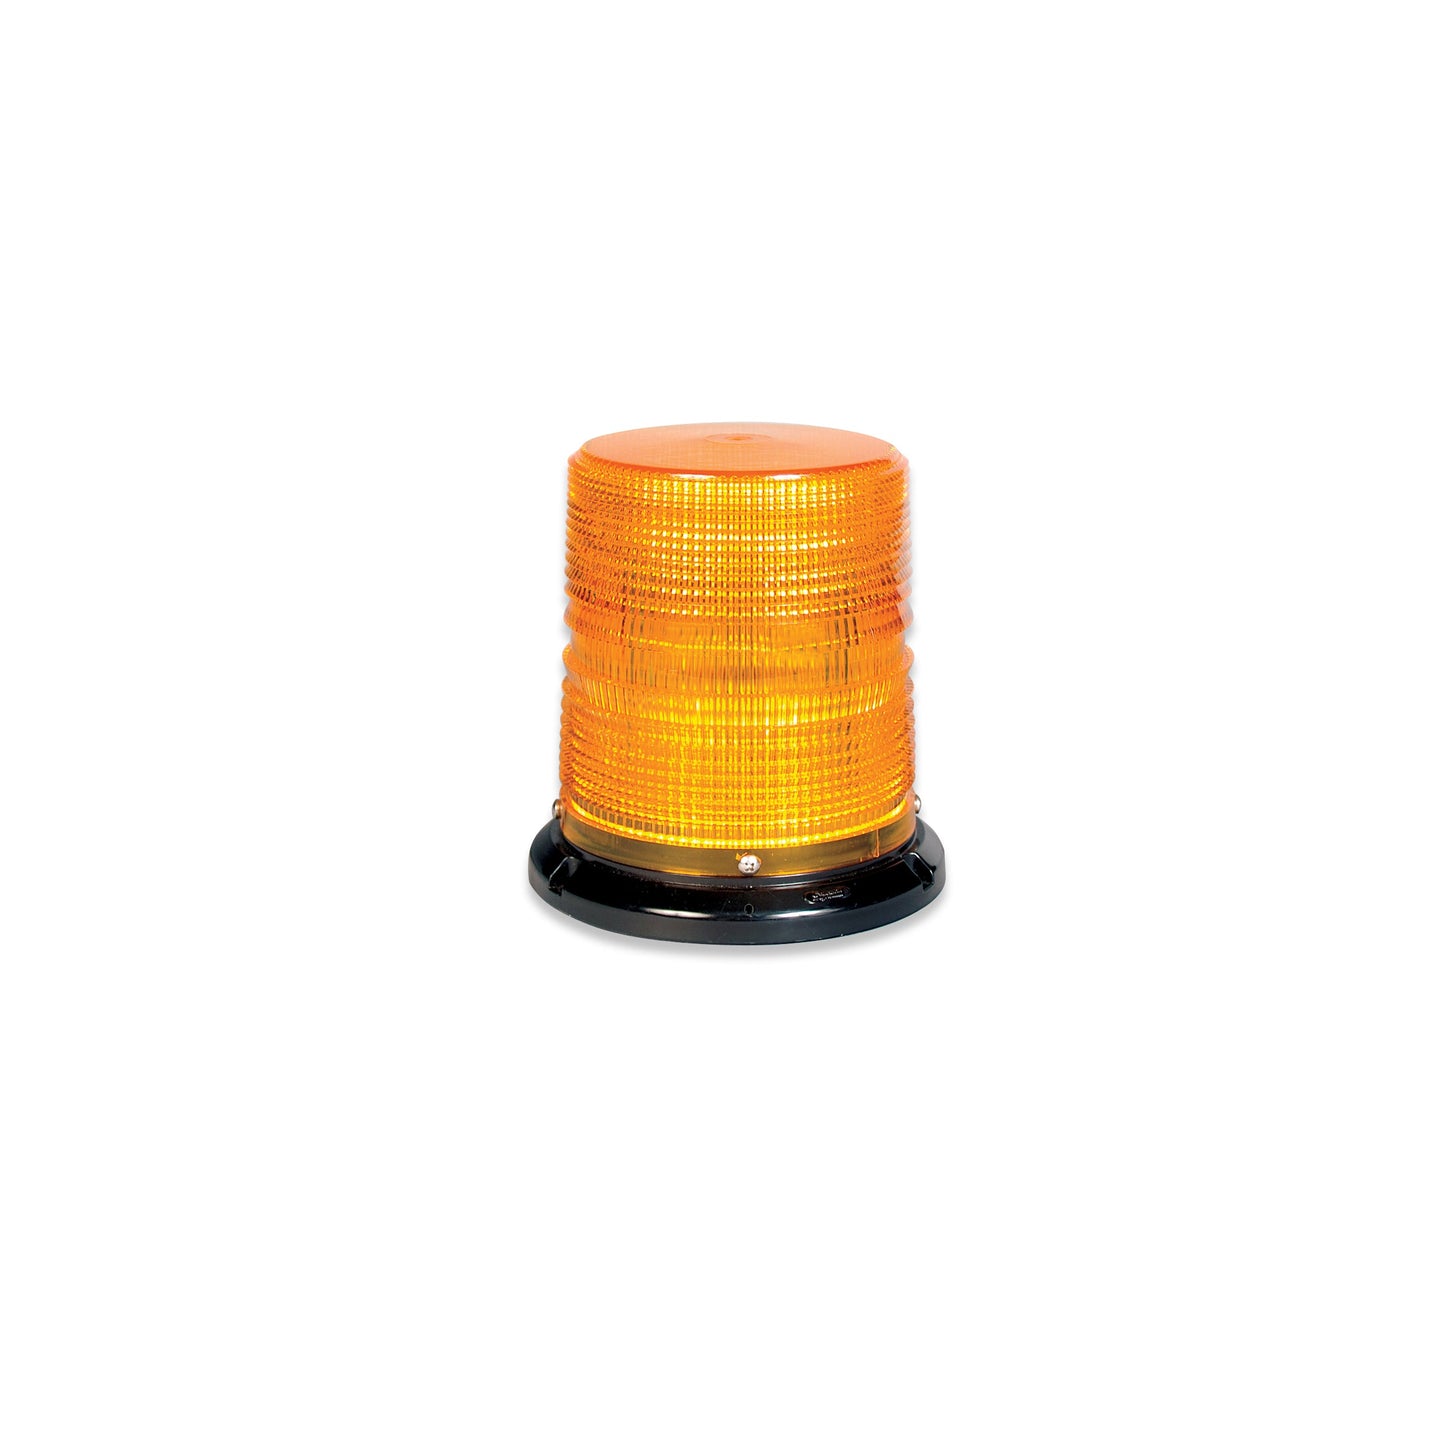 Soundoff Signal ELB45BCH0PC 4500 Series Led Beacon, 10-30V, Sae J845 Class 1 - Flat/Pipe Mount, 6" Clear Dome/ Green & Amber Leds